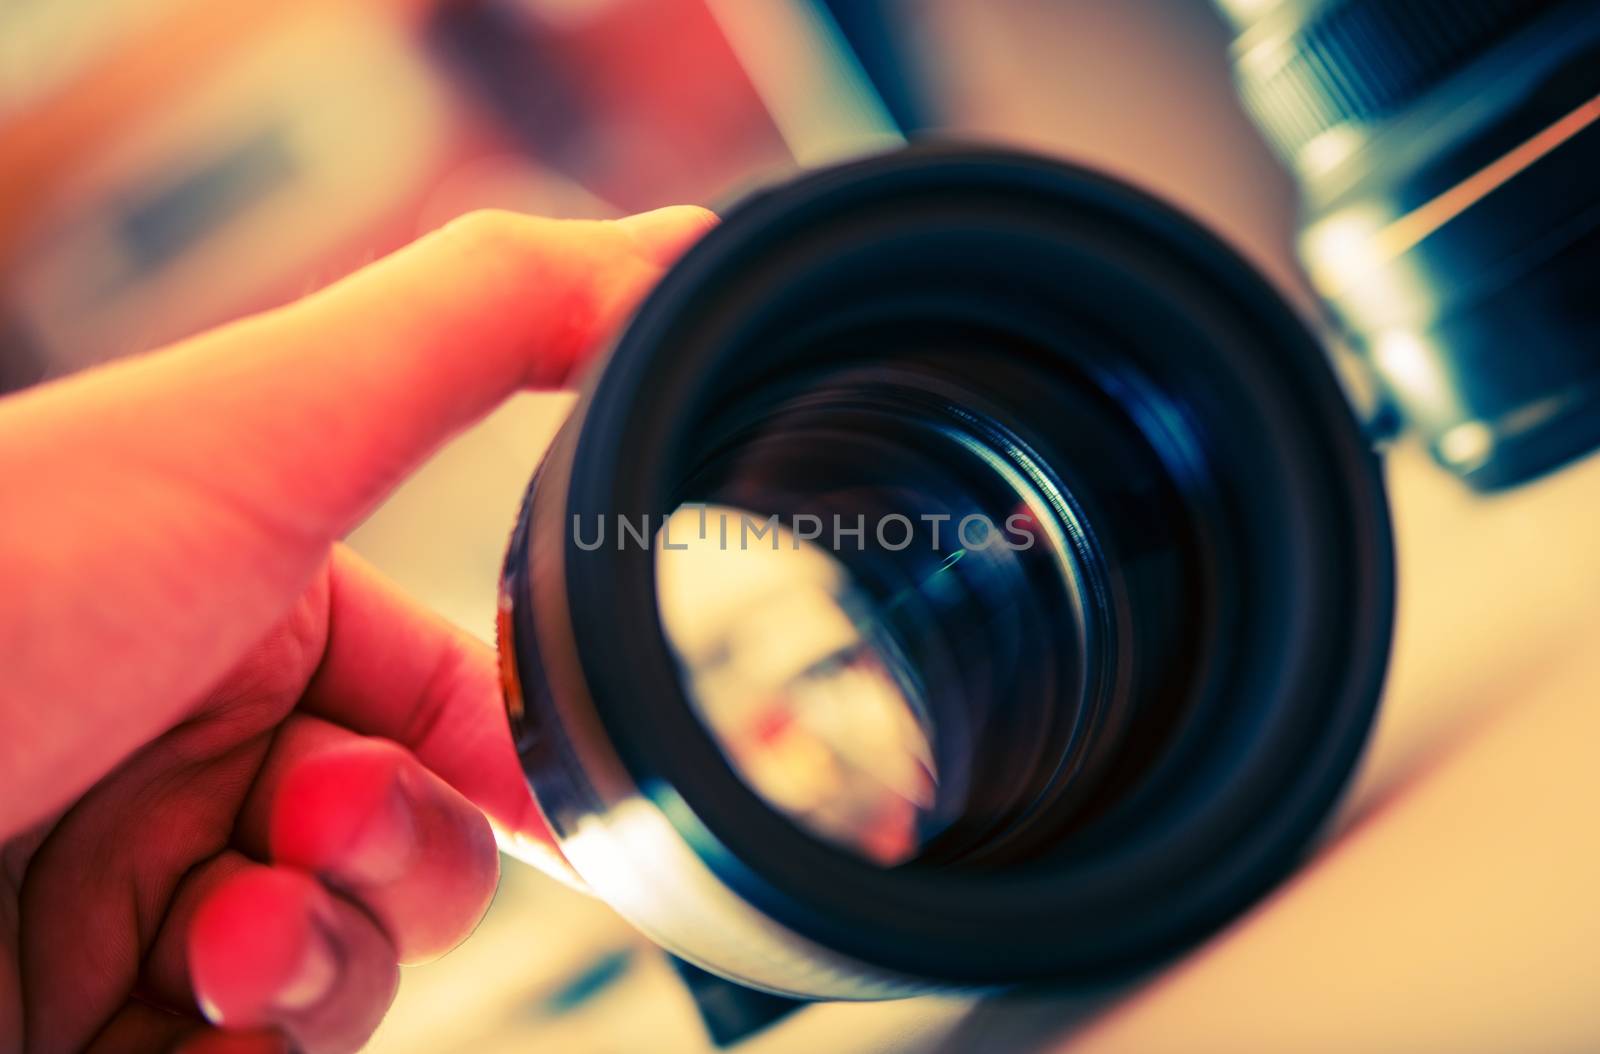 Servicing Photography Lens. Telephoto Lens Check. Digital Photography Theme.